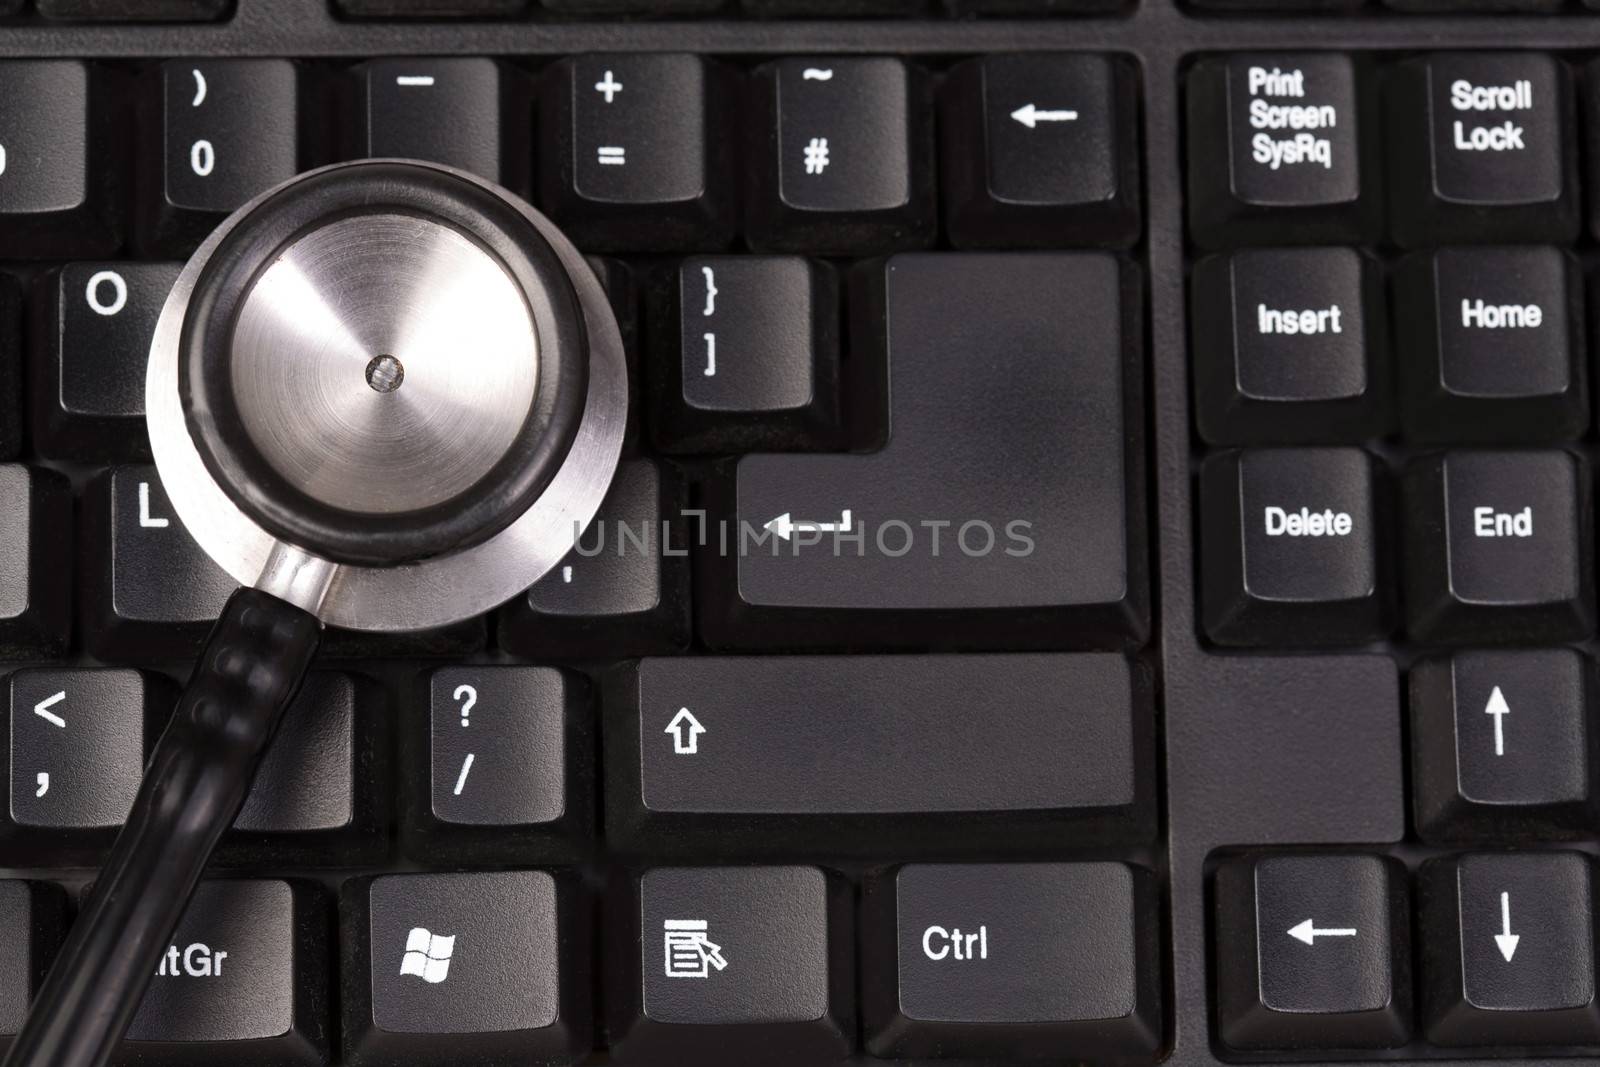 Stethoscope on computer keyboard to diagnose an issue